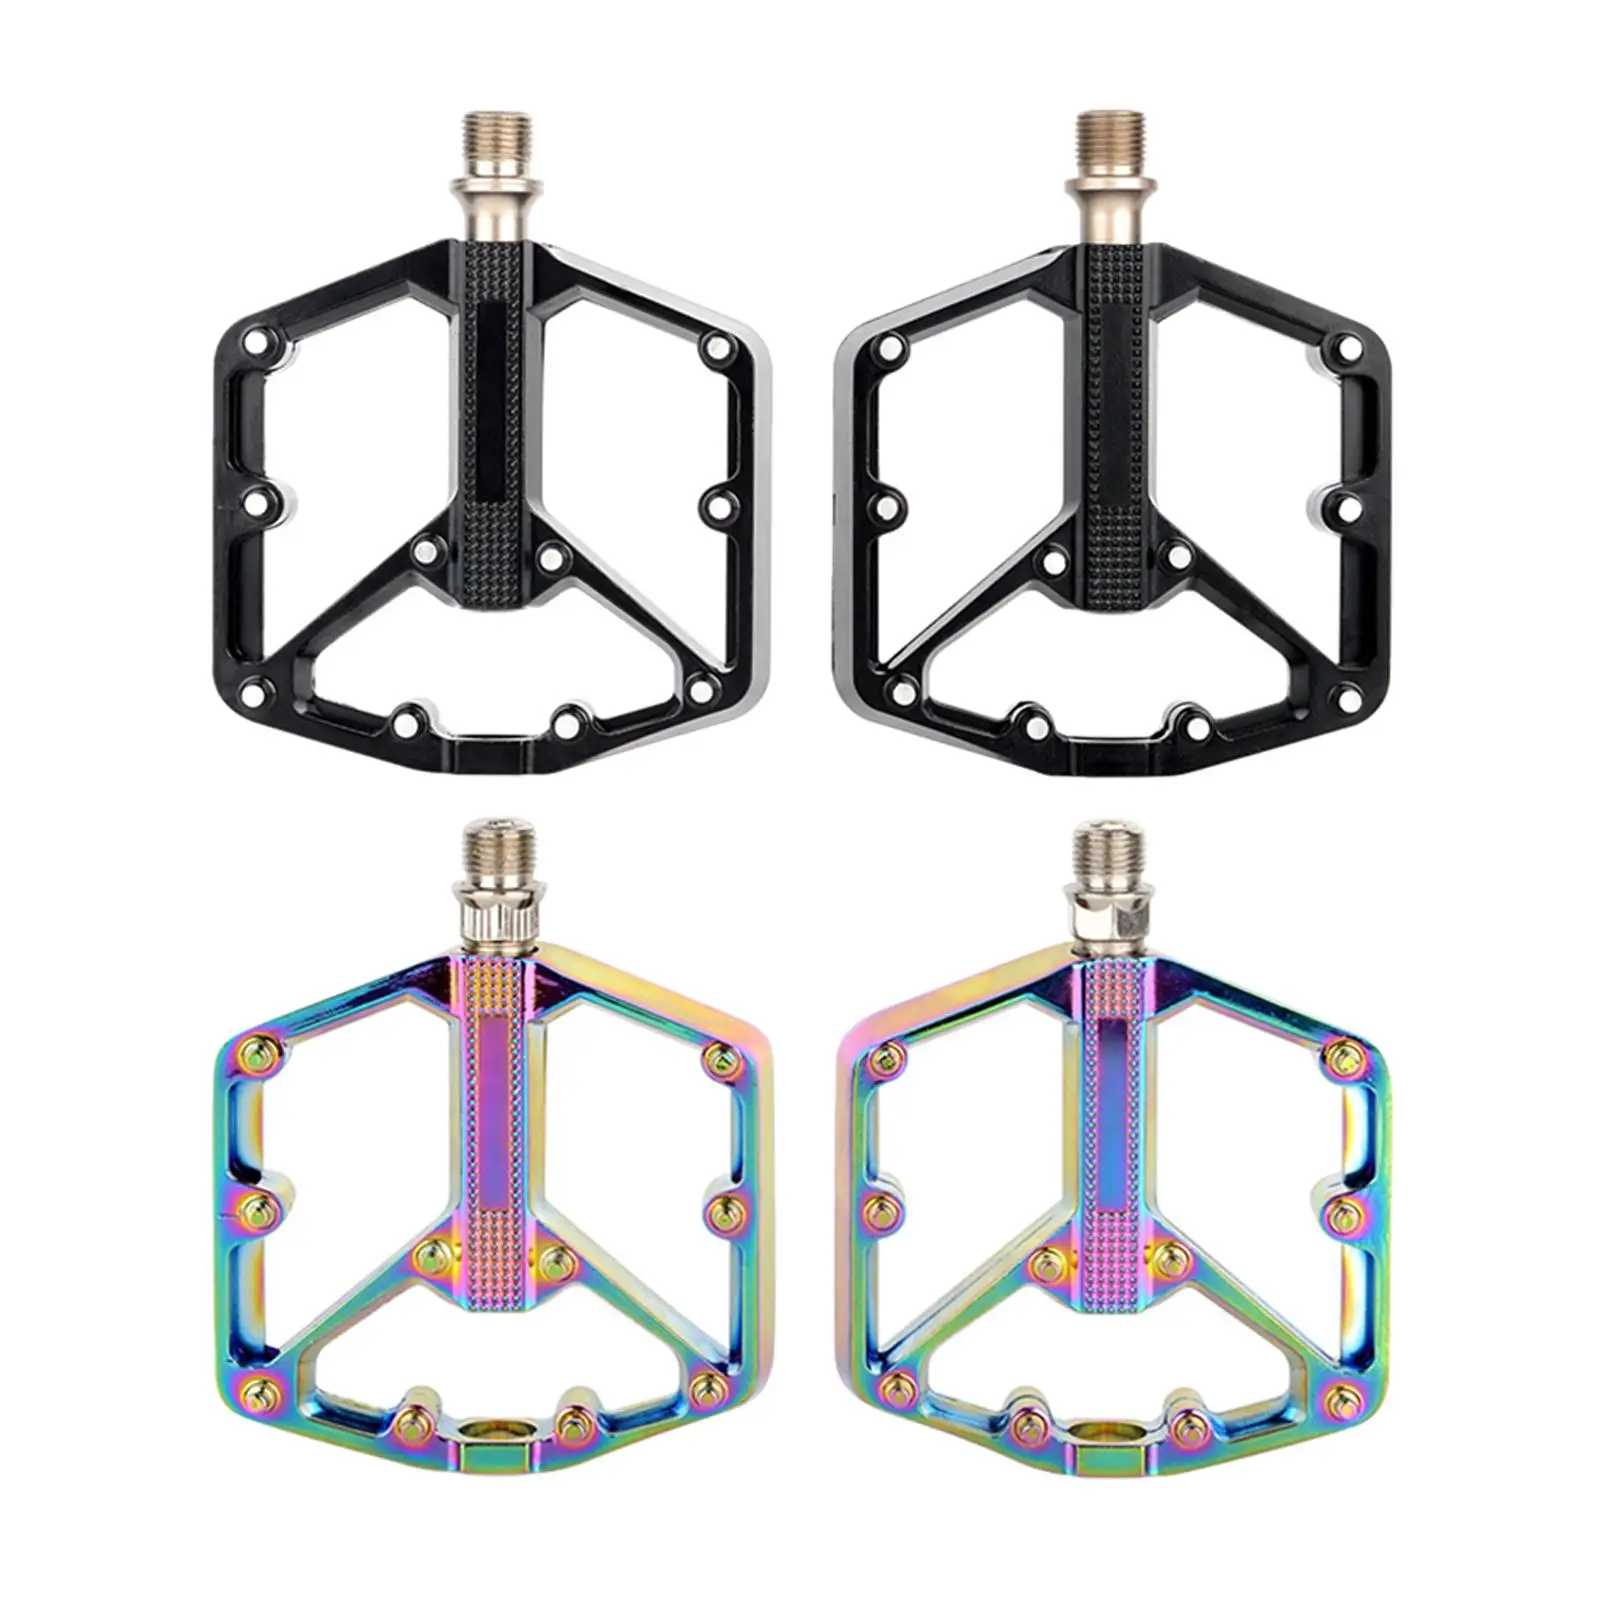 Road Bike Pedals, Aluminum Alloy Bike Pedals, Mountain Bike Pedal with 3 Bearing 9/16